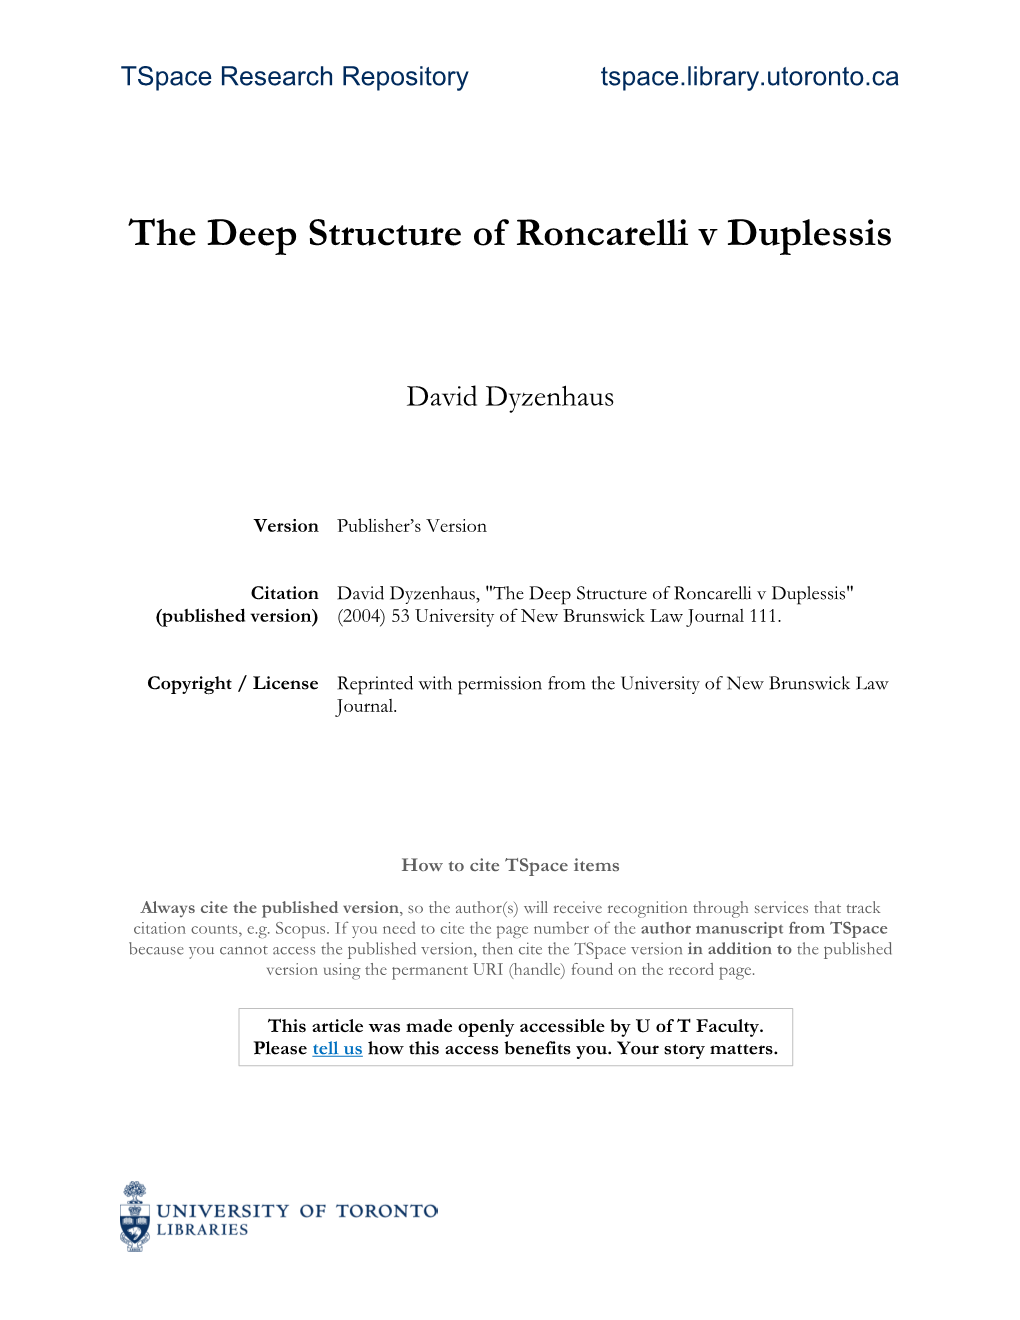 The Deep Structure of Roncarelli V Duplessis